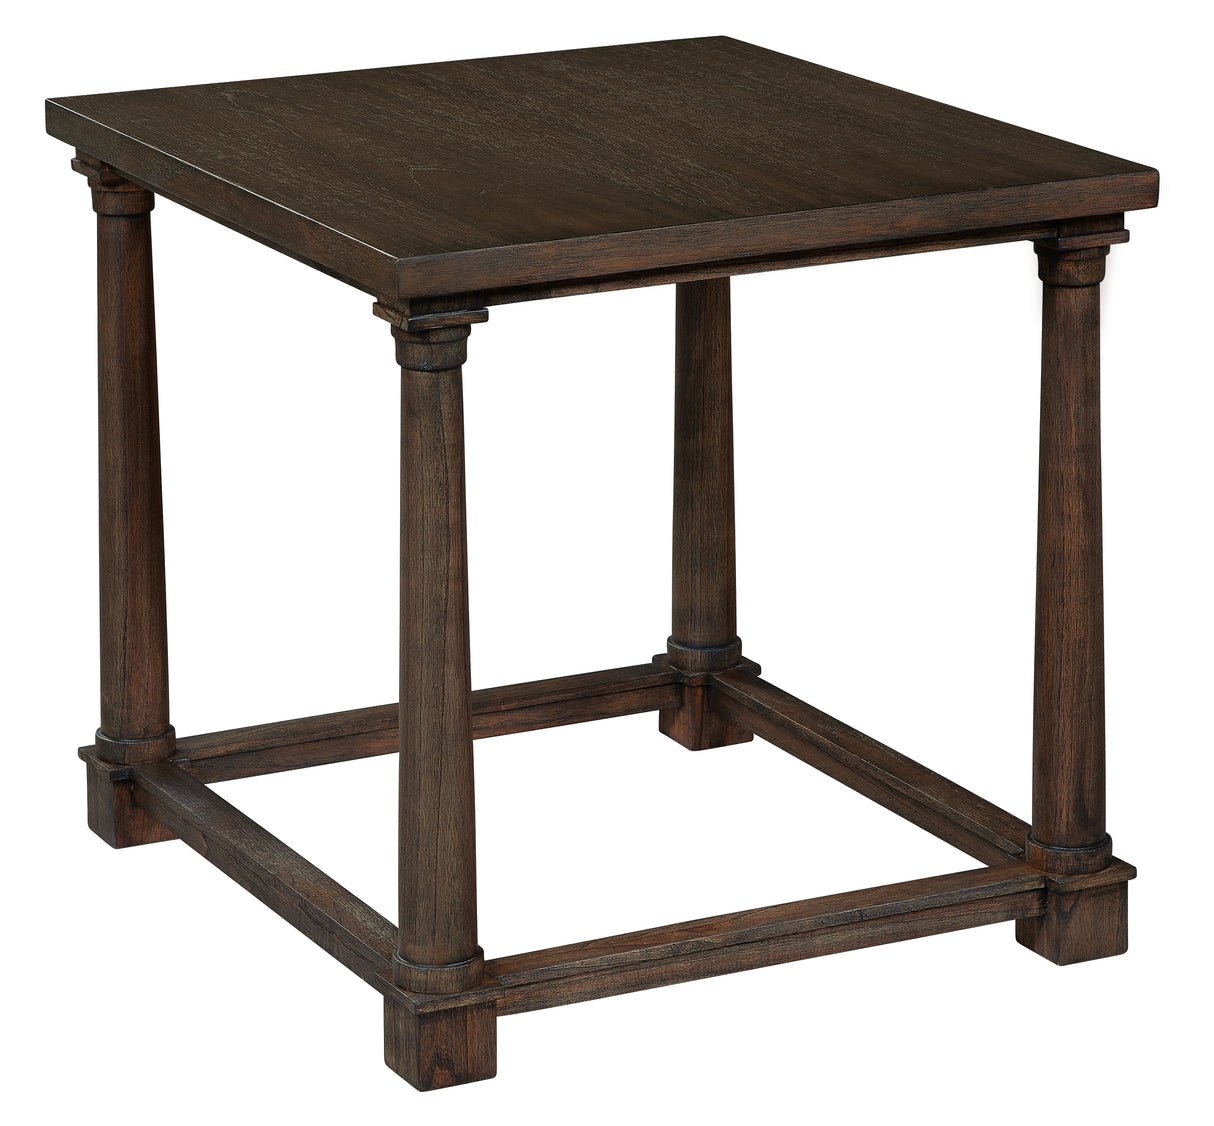 Hekman 25603 Linwood 28in. x 26in. x 26.25in. End Table